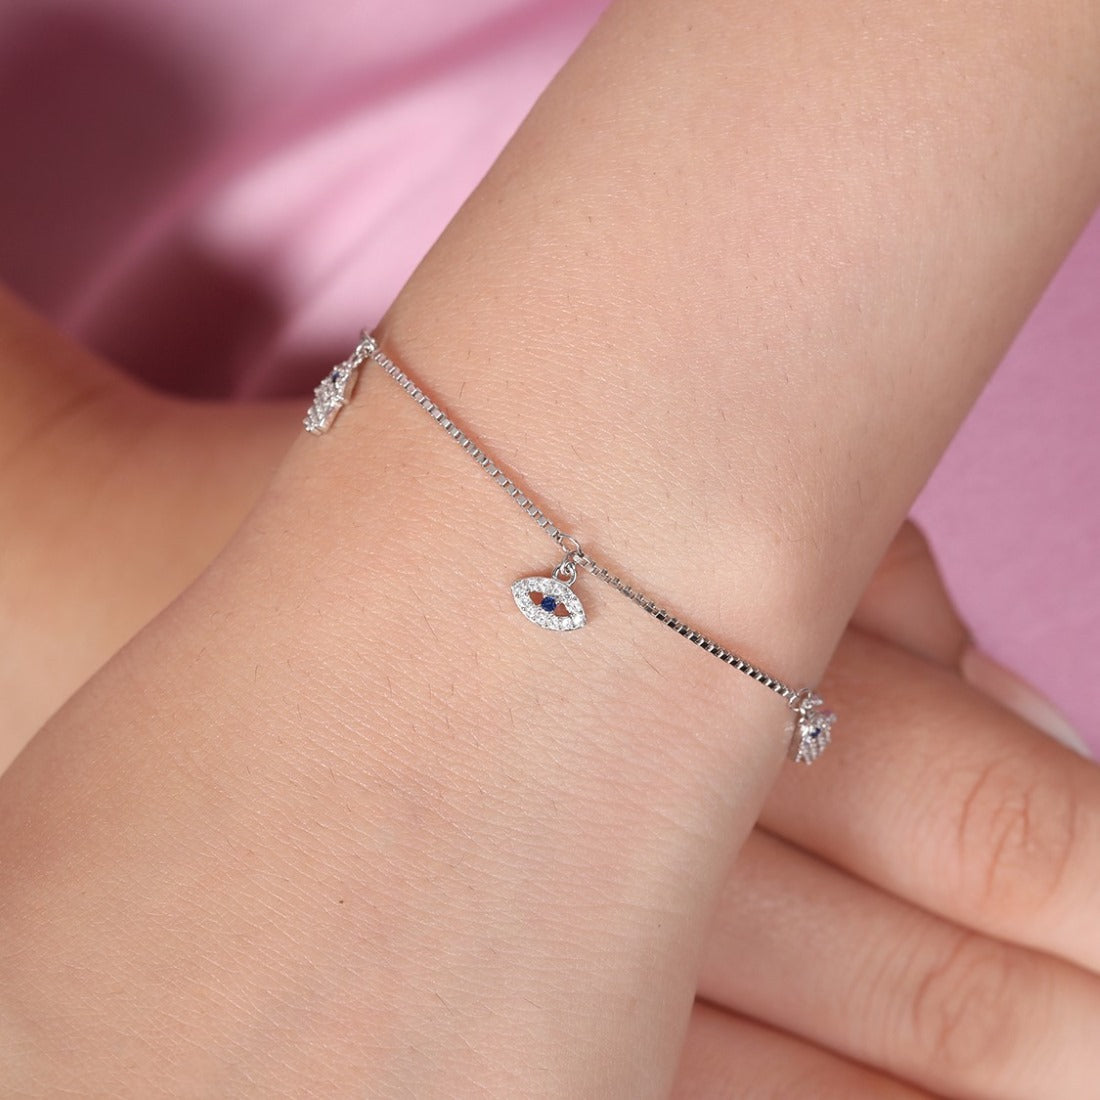 Protective Charms Rhodium Plated 925 Sterling Silver Bracelet